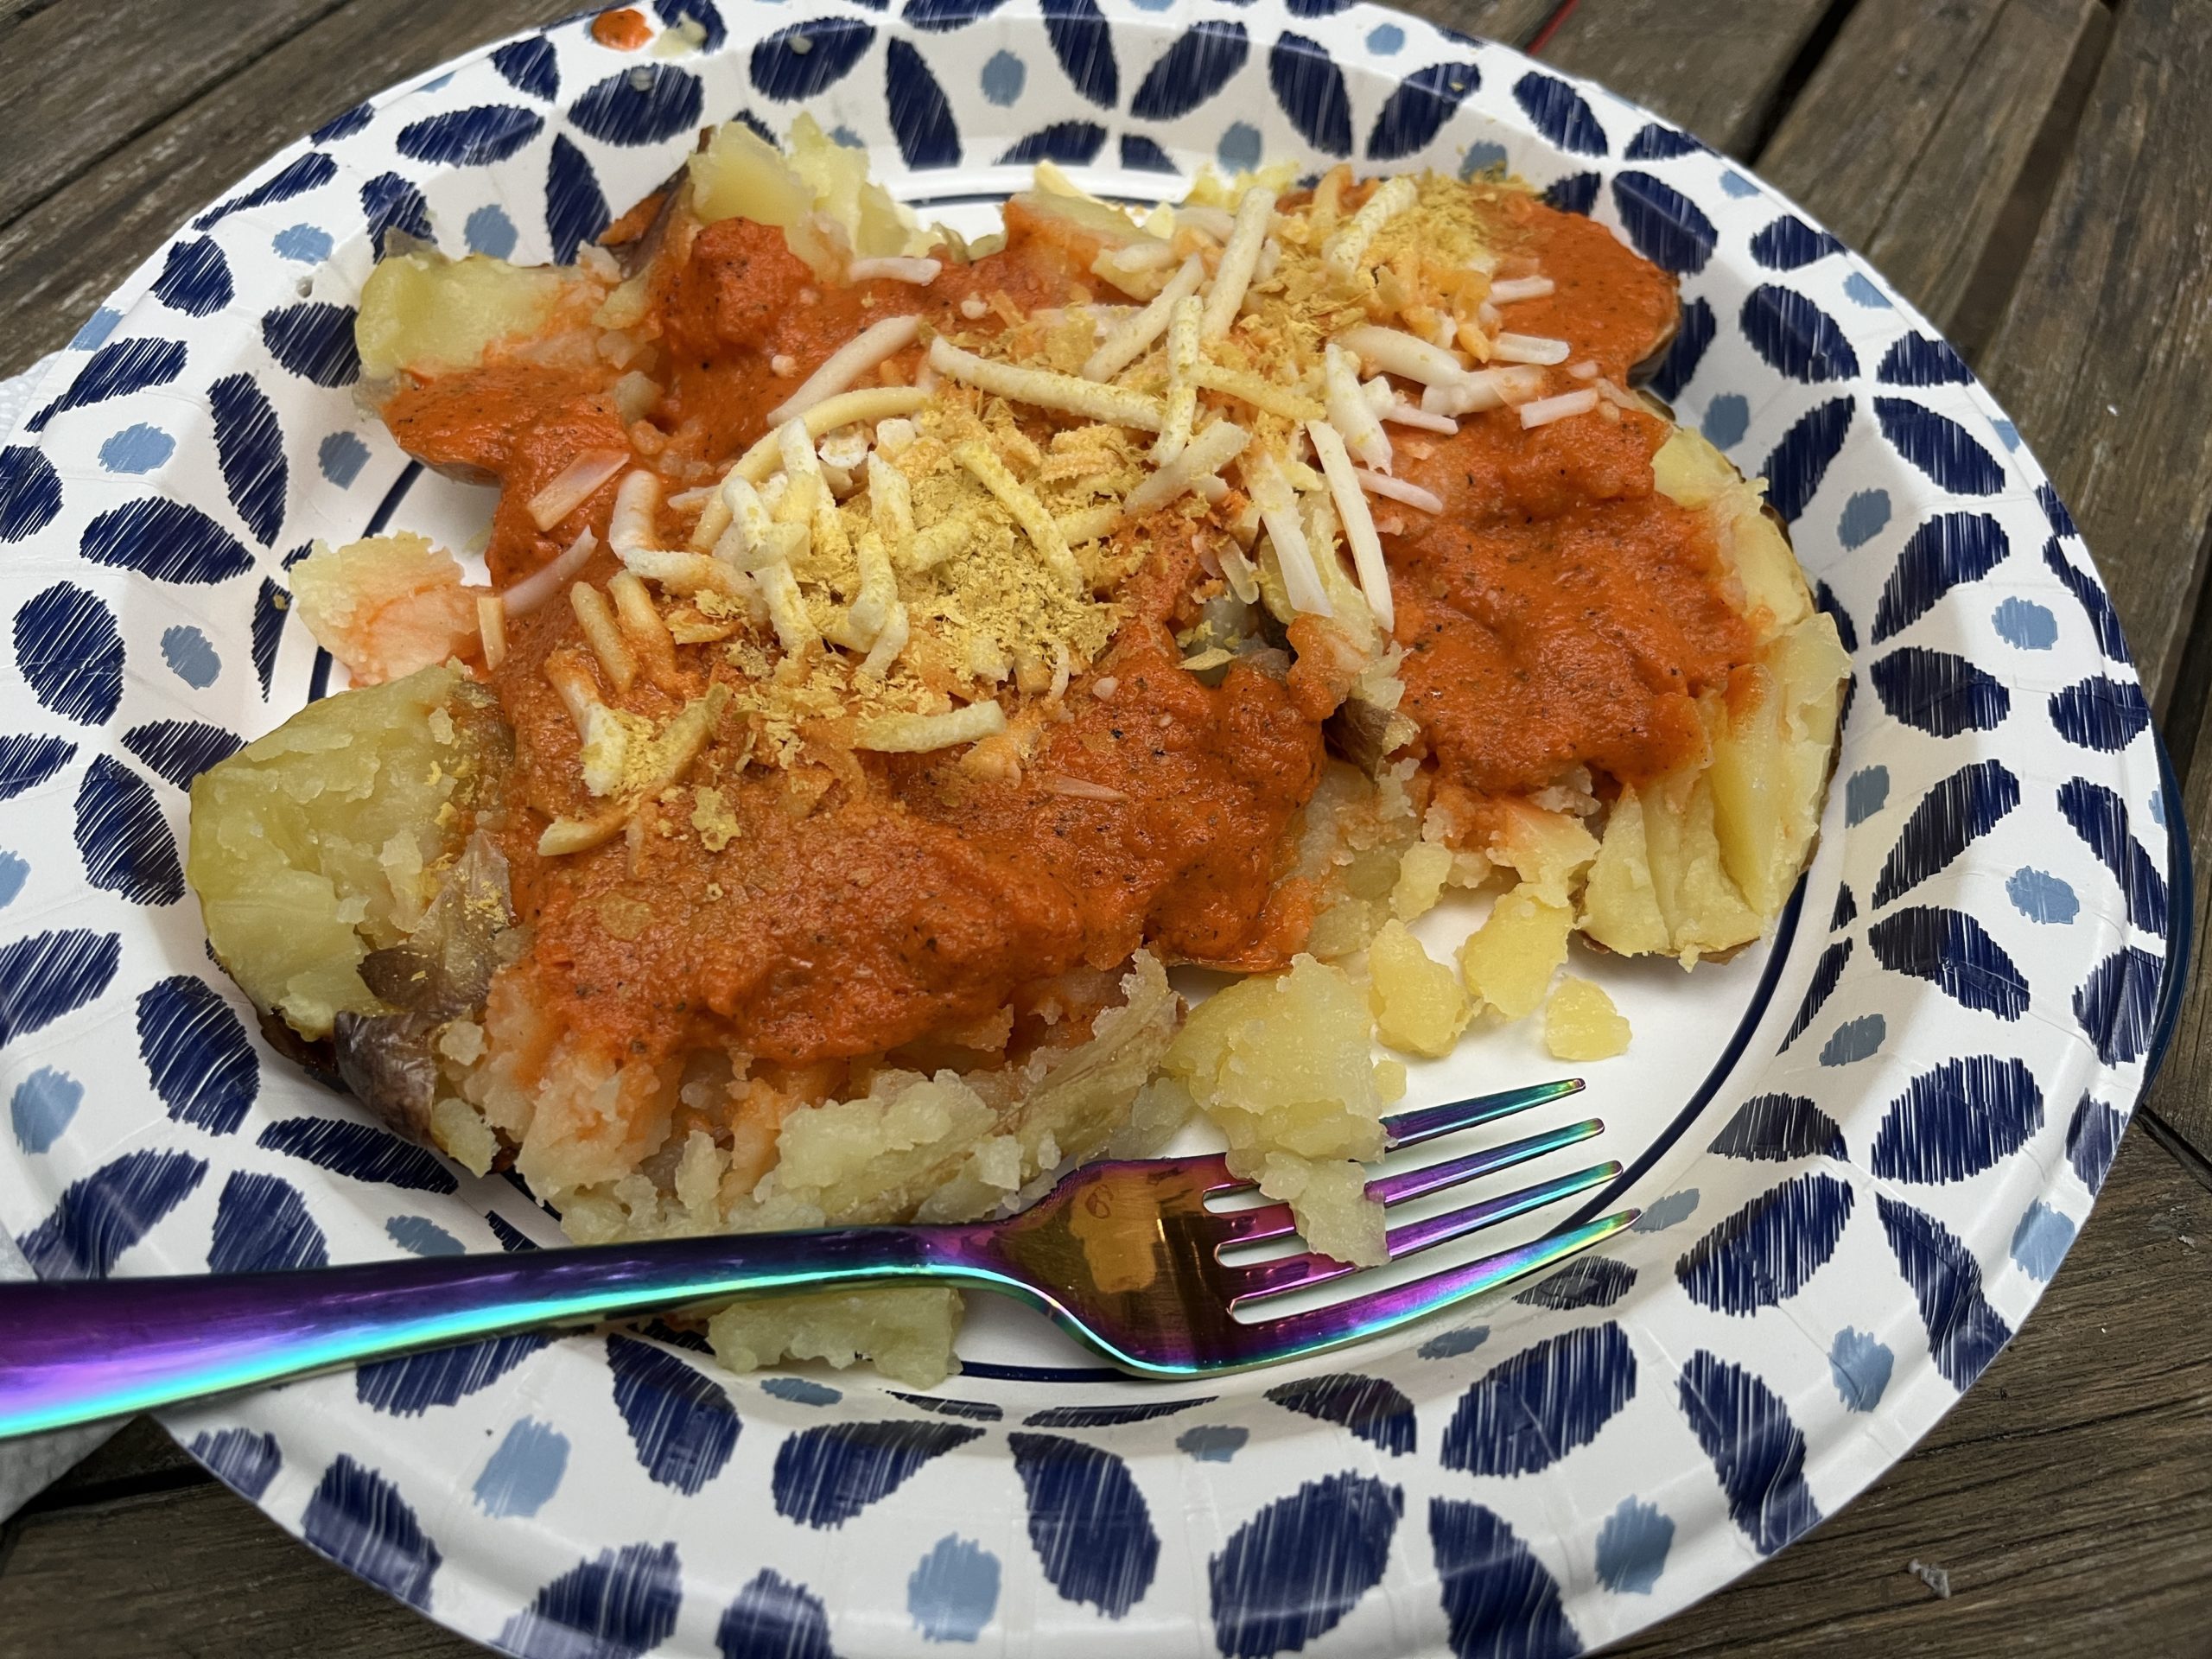 An open faced baked potato with orange sauce and shredded cheese. 